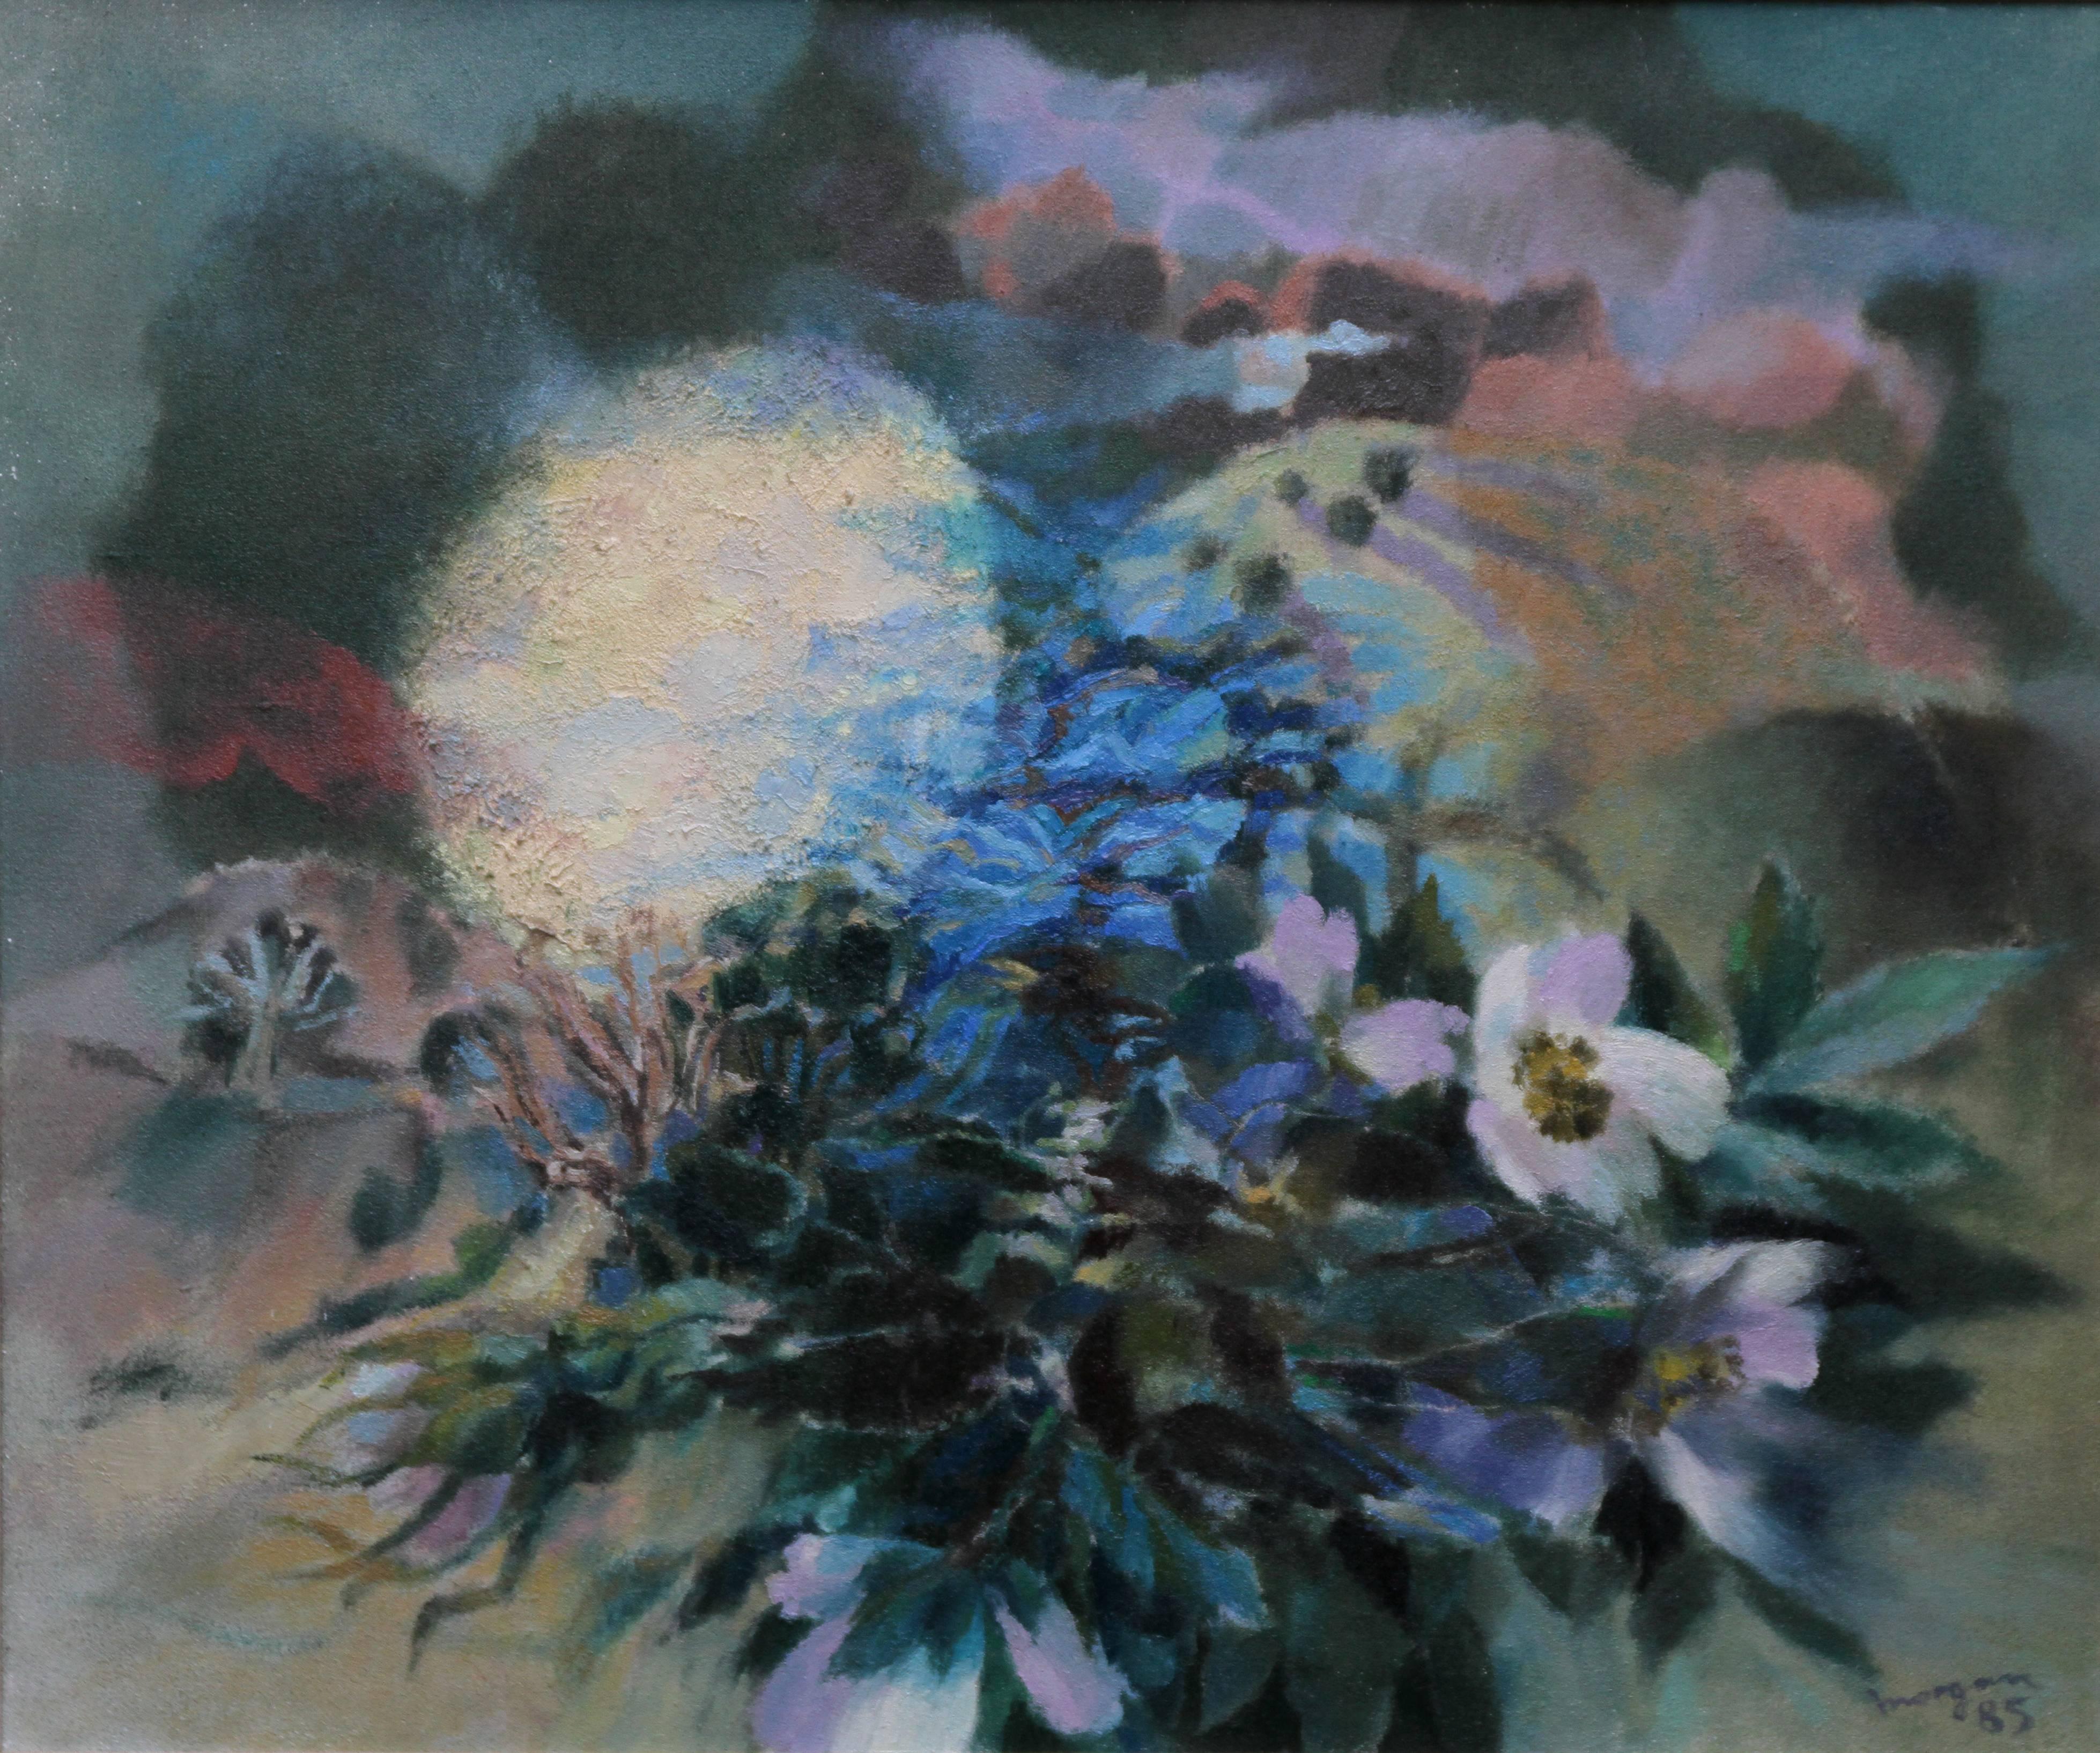 Glyn Morgan Landscape Painting - Welsh Landscape - Nightingale - abstract art oil painting flowers moon birds